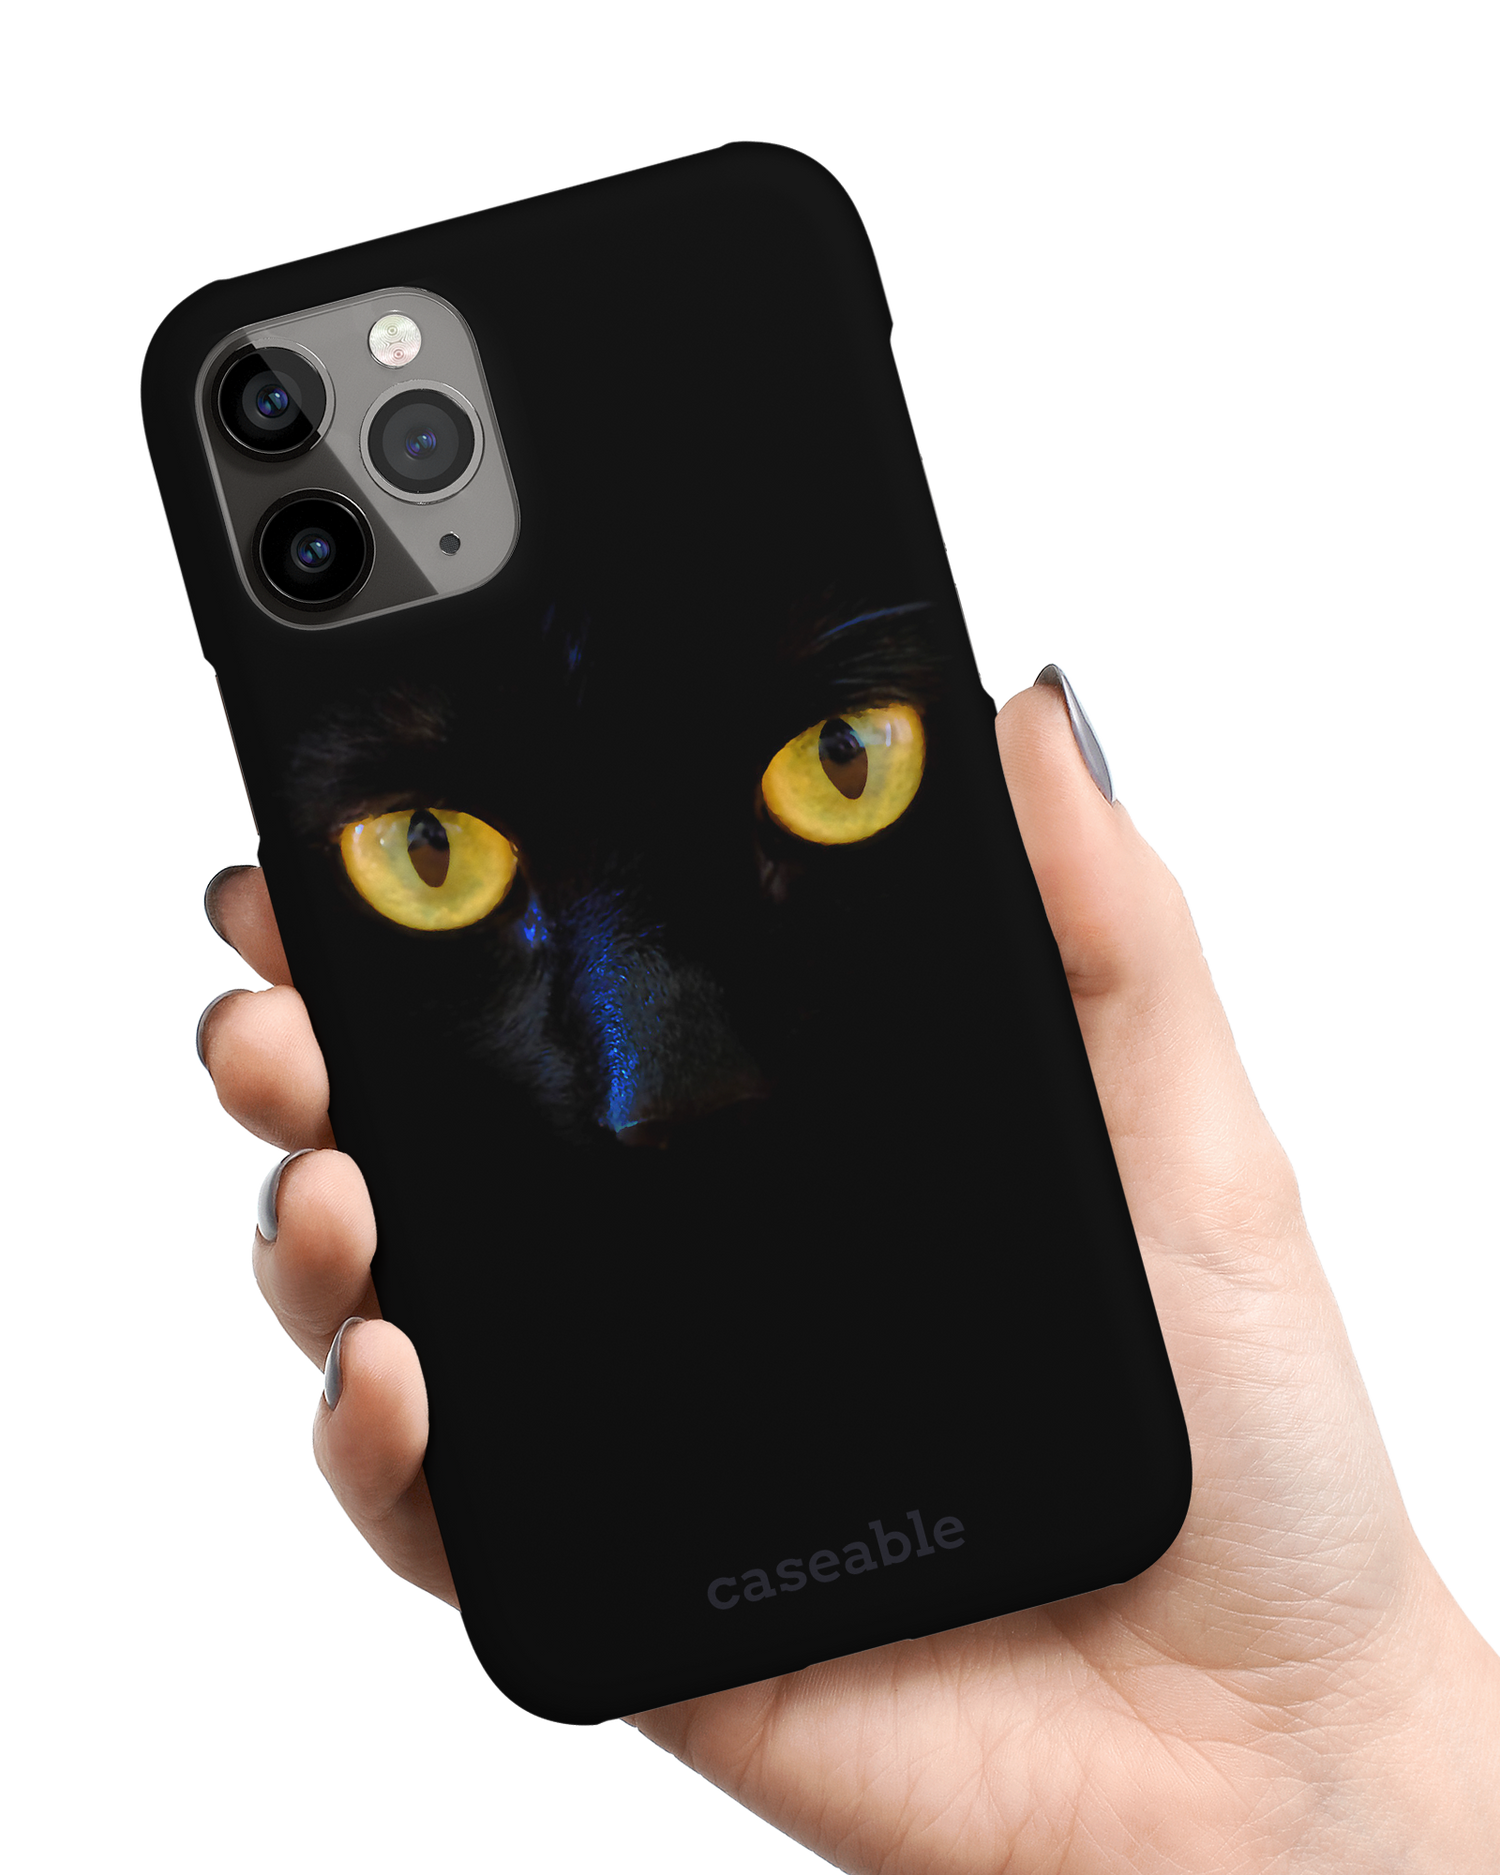 Black Cat Hard Shell Phone Case Apple iPhone 11 Pro held in hand